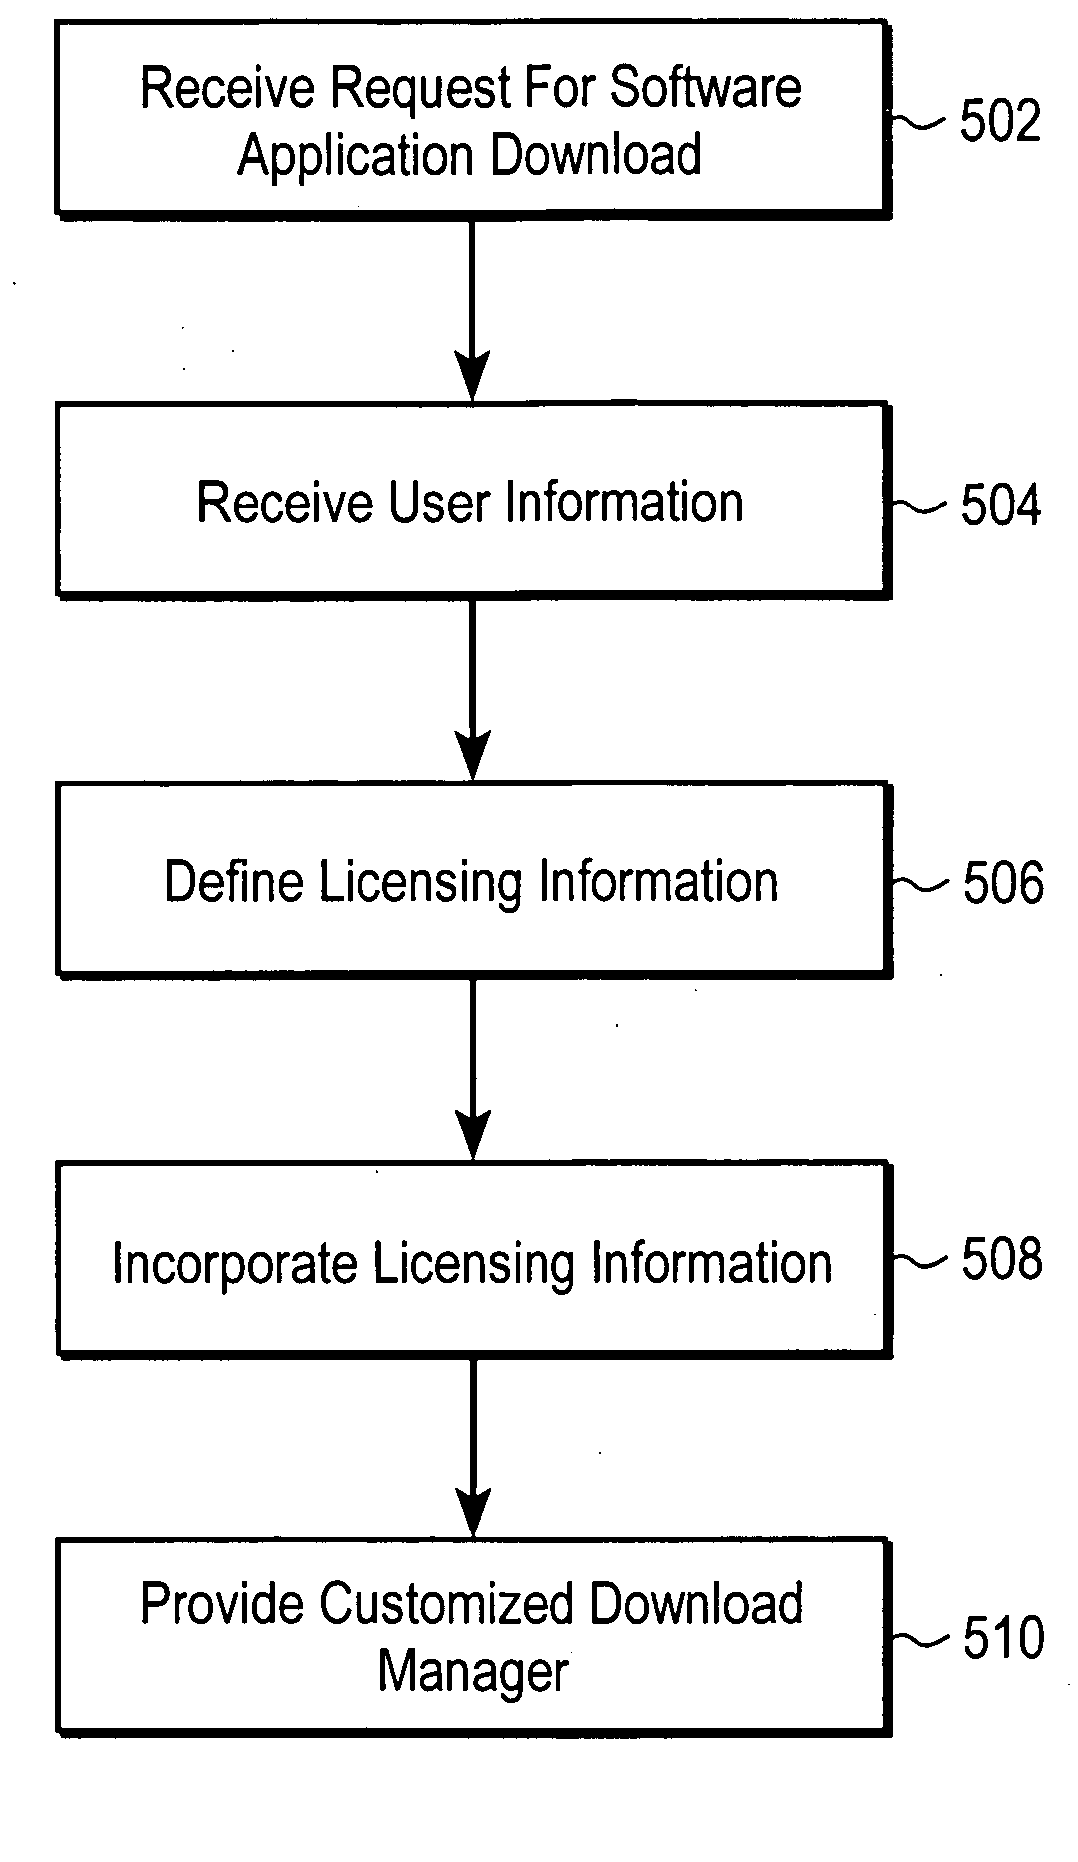 Associating licensing information with software applications